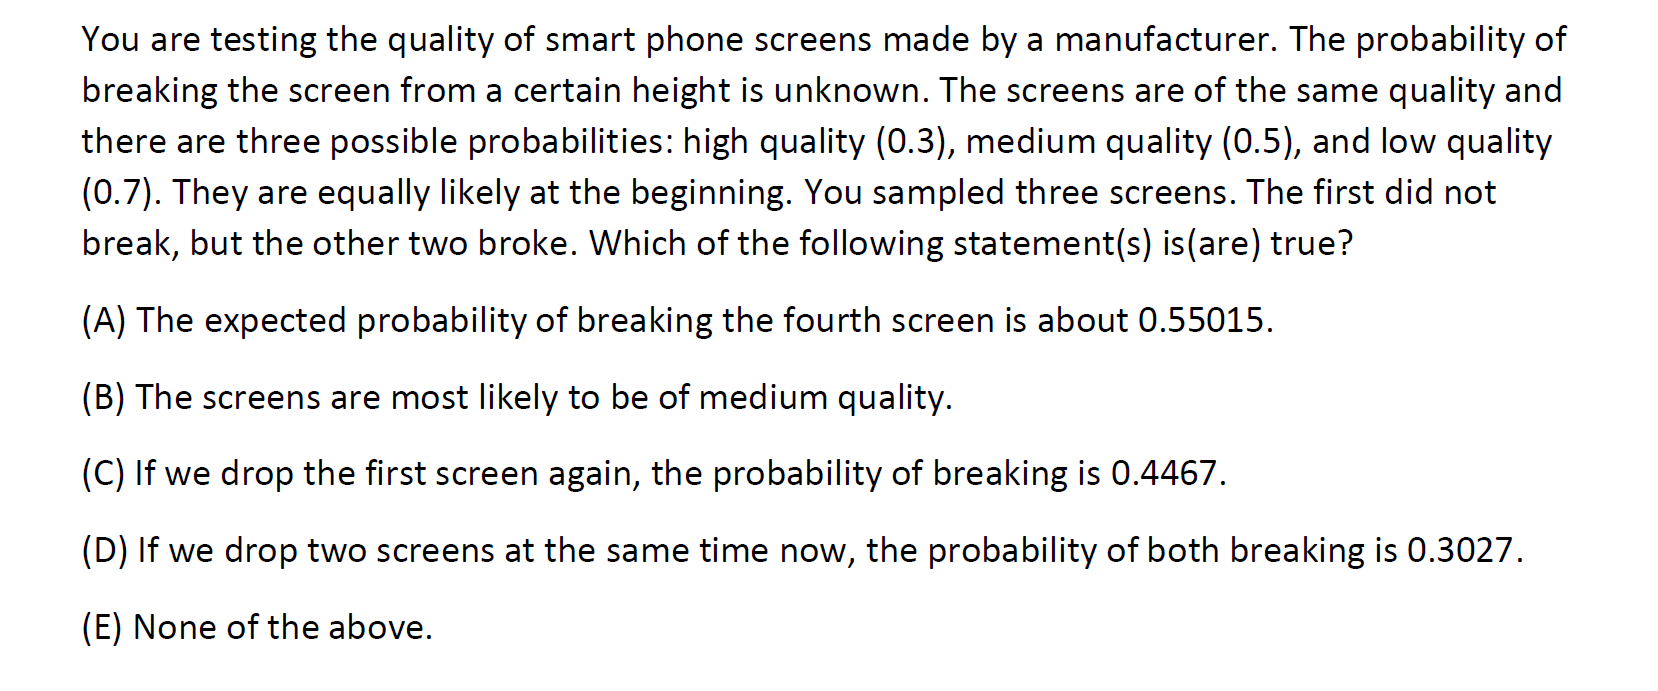 You Are Testing The Quality Of Smart Phone Screens Made By A Manufacturer The Probability Of Breaking The Screen From A 1